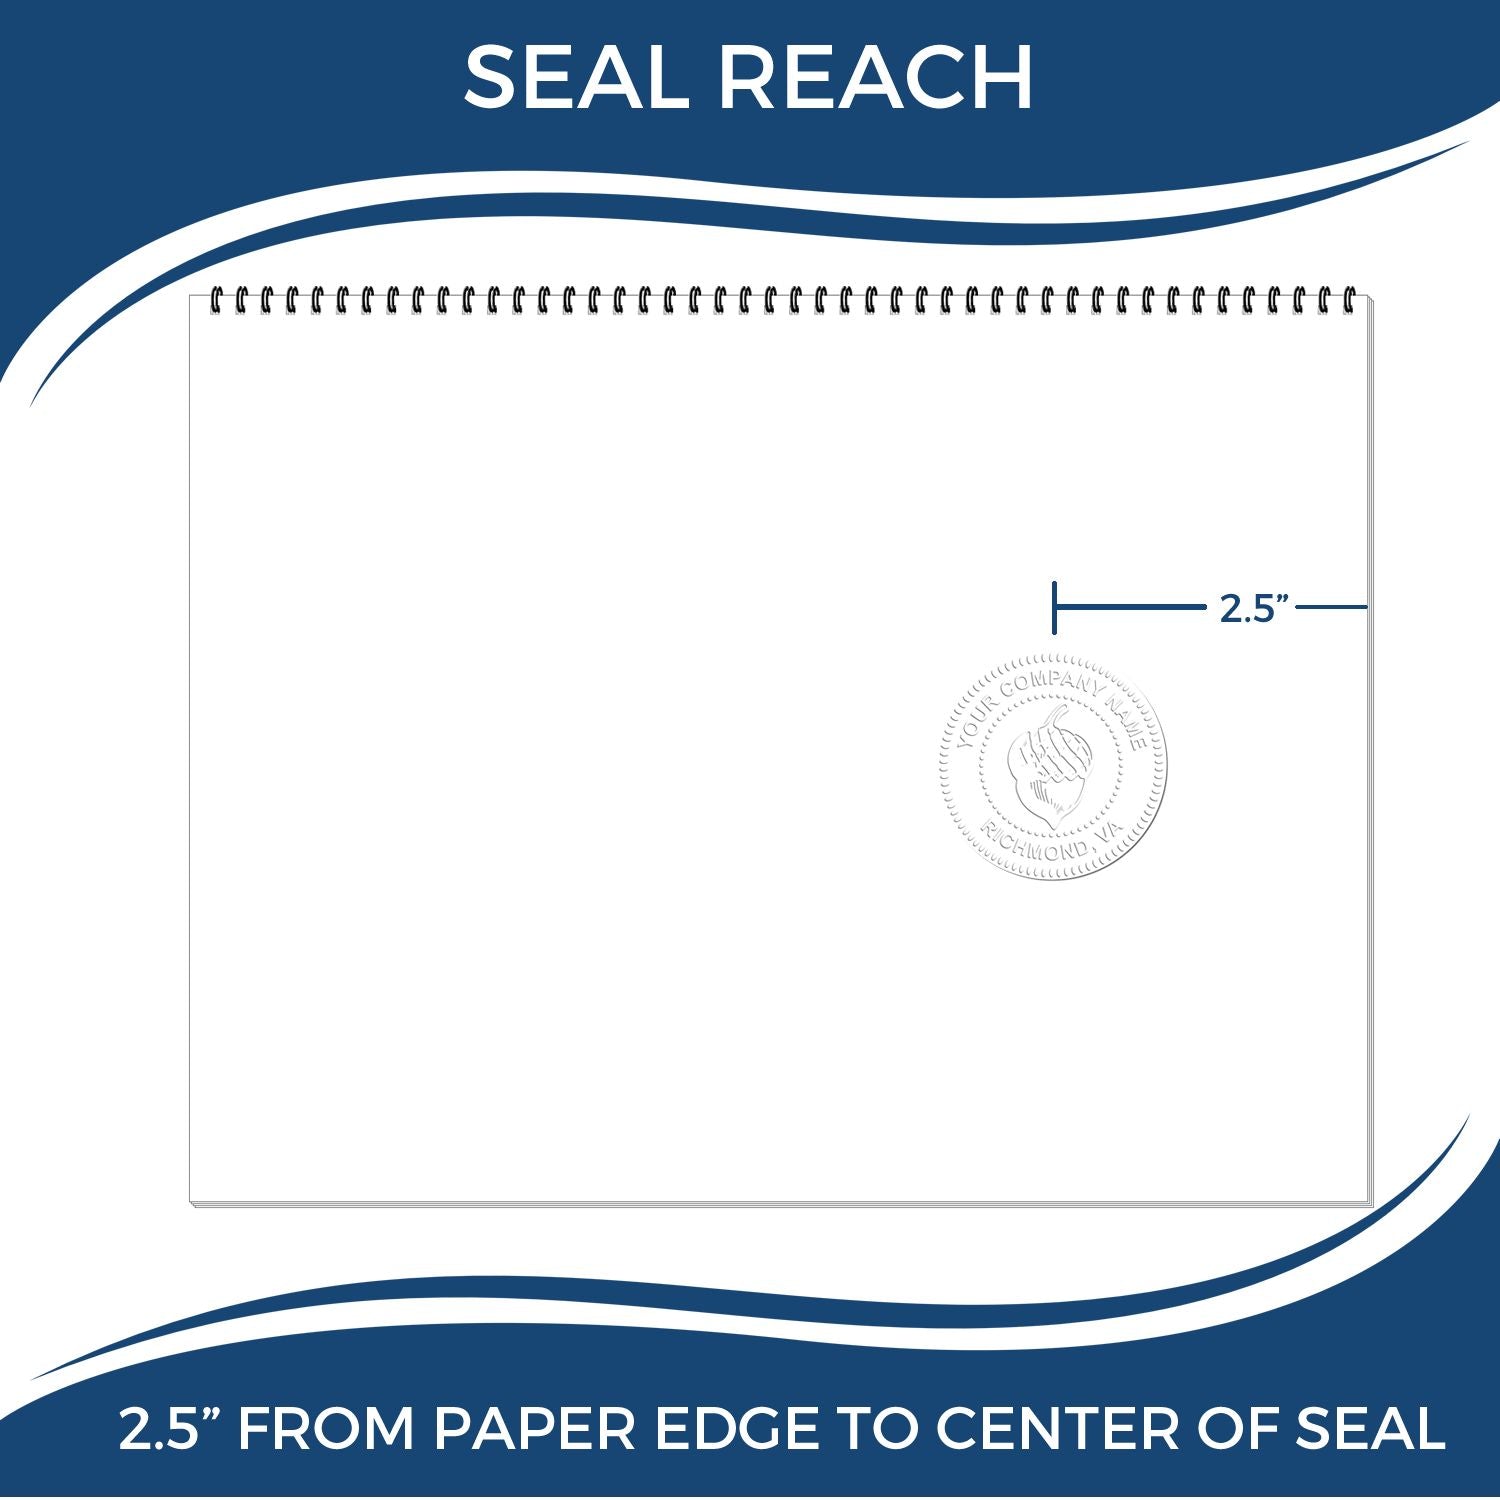 An infographic showing the seal reach which is represented by a ruler and a miniature seal image of the Heavy Duty Cast Iron New Jersey Engineer Seal Embosser